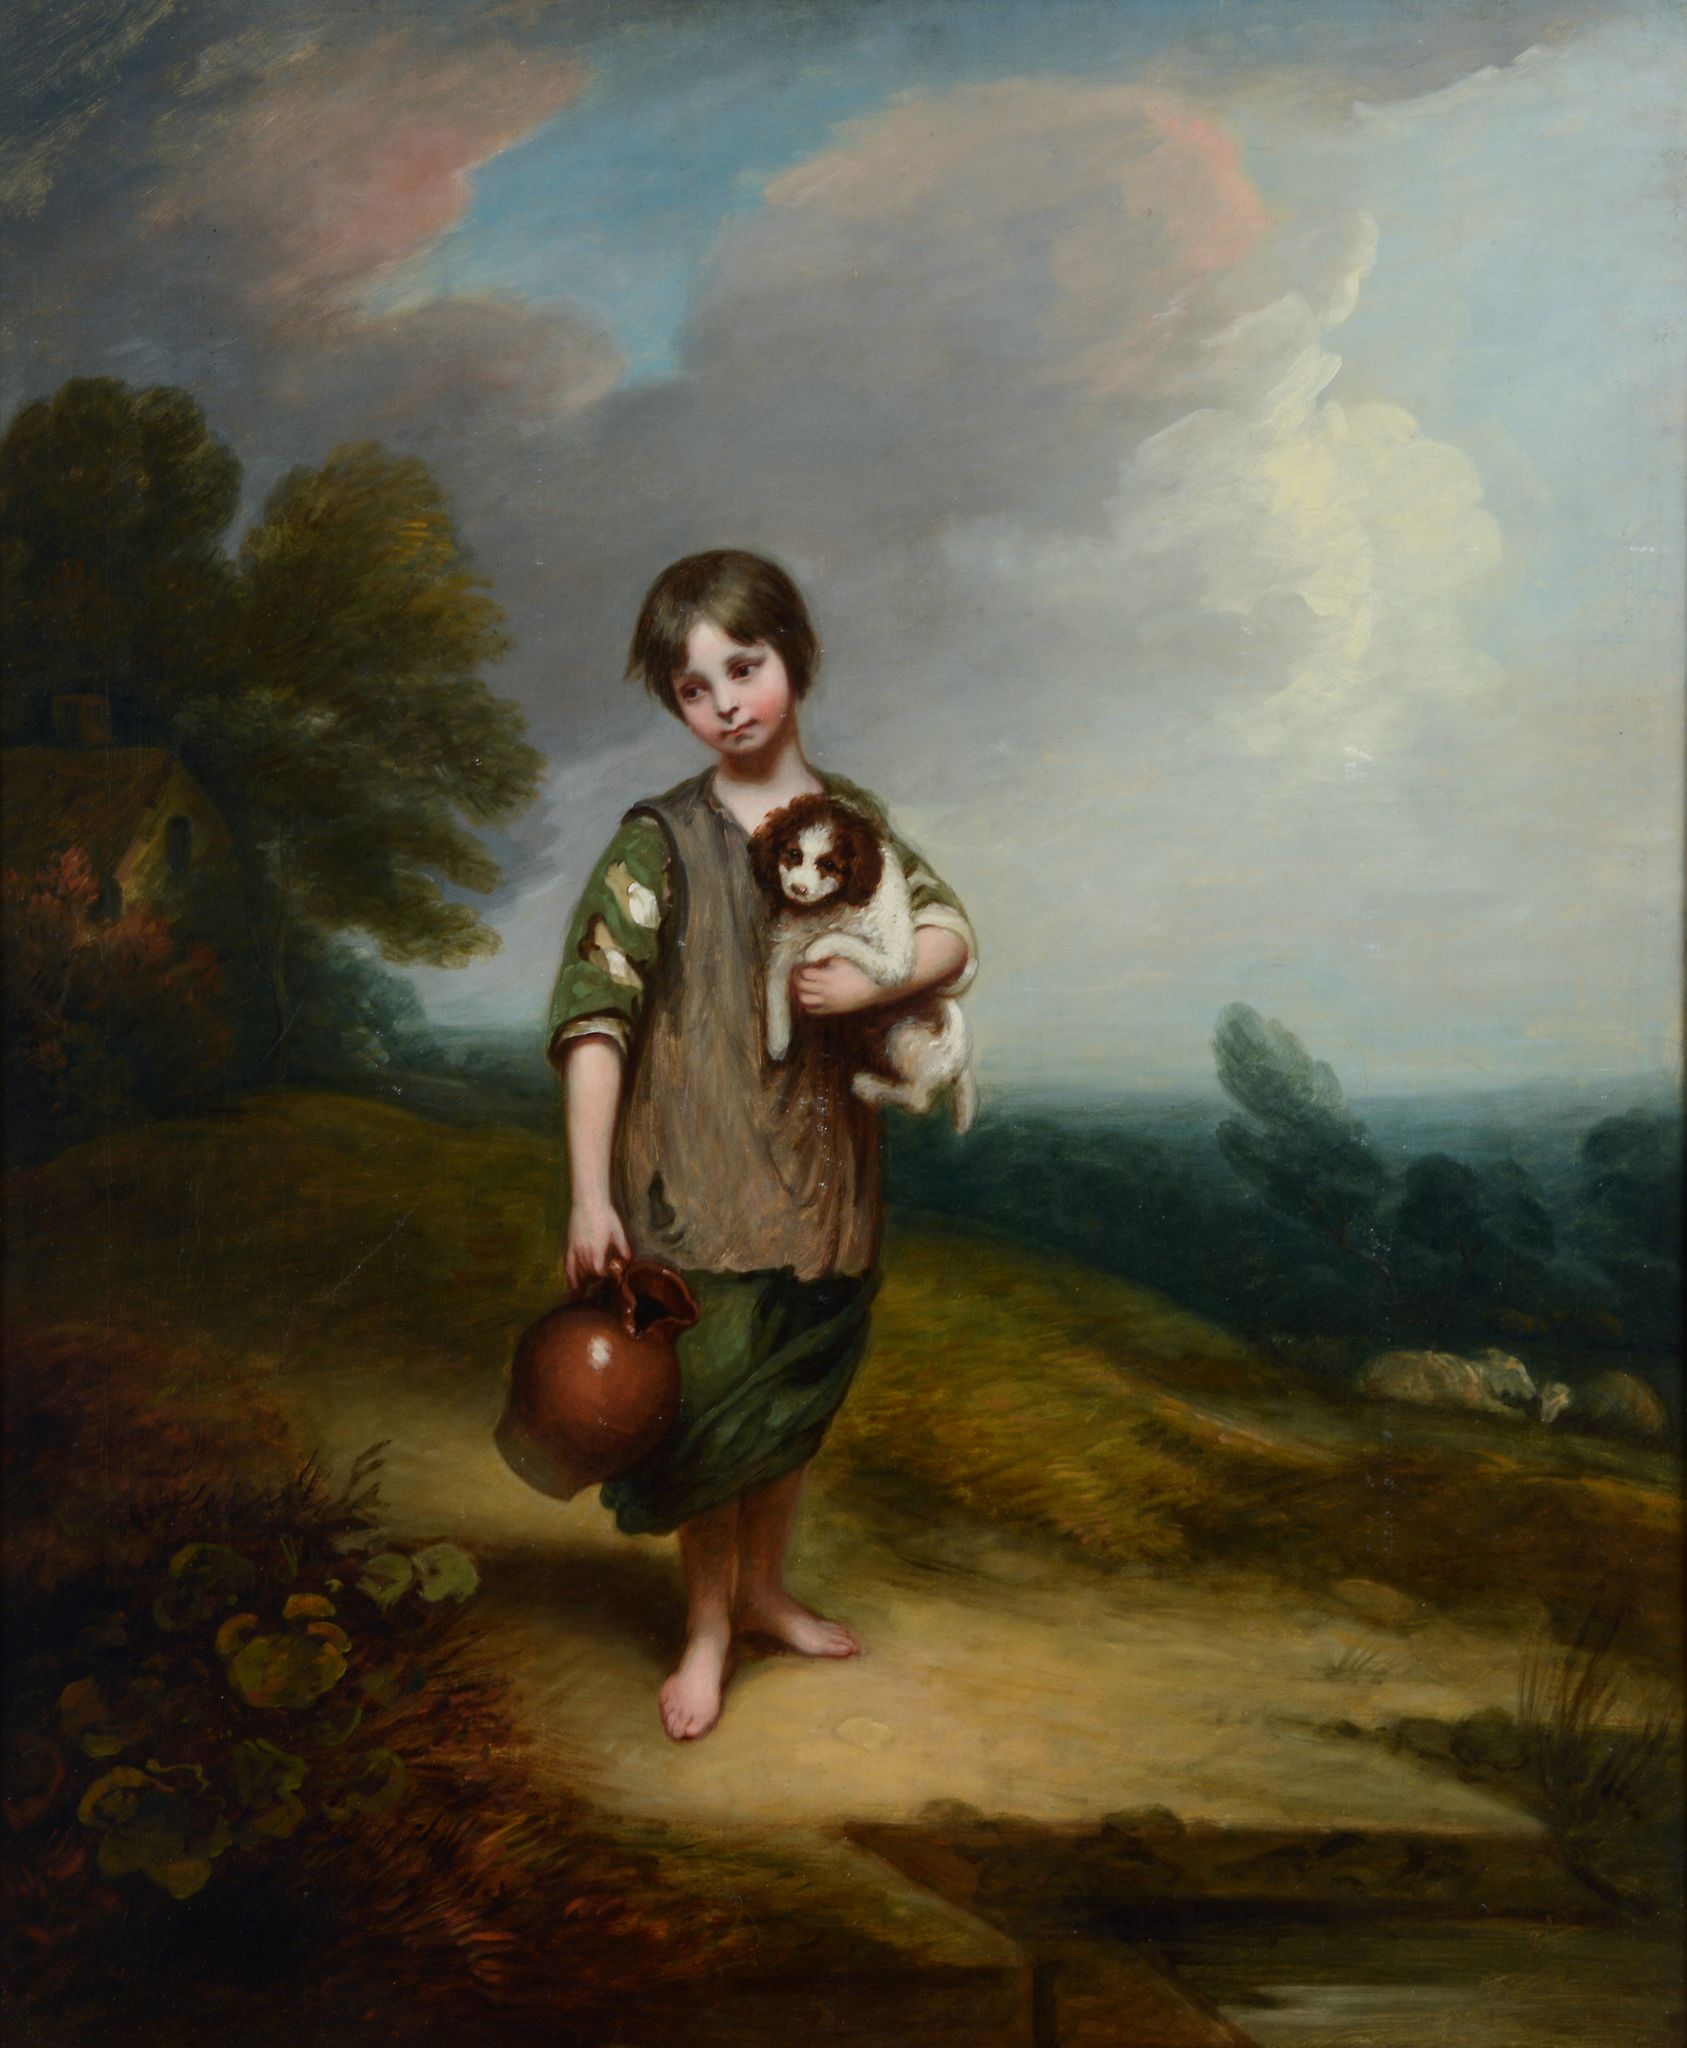 Circle of Thomas Barker, 'Barker of Bath' - The Cottage Girl After Thomas Gainsborough Oil on canvas